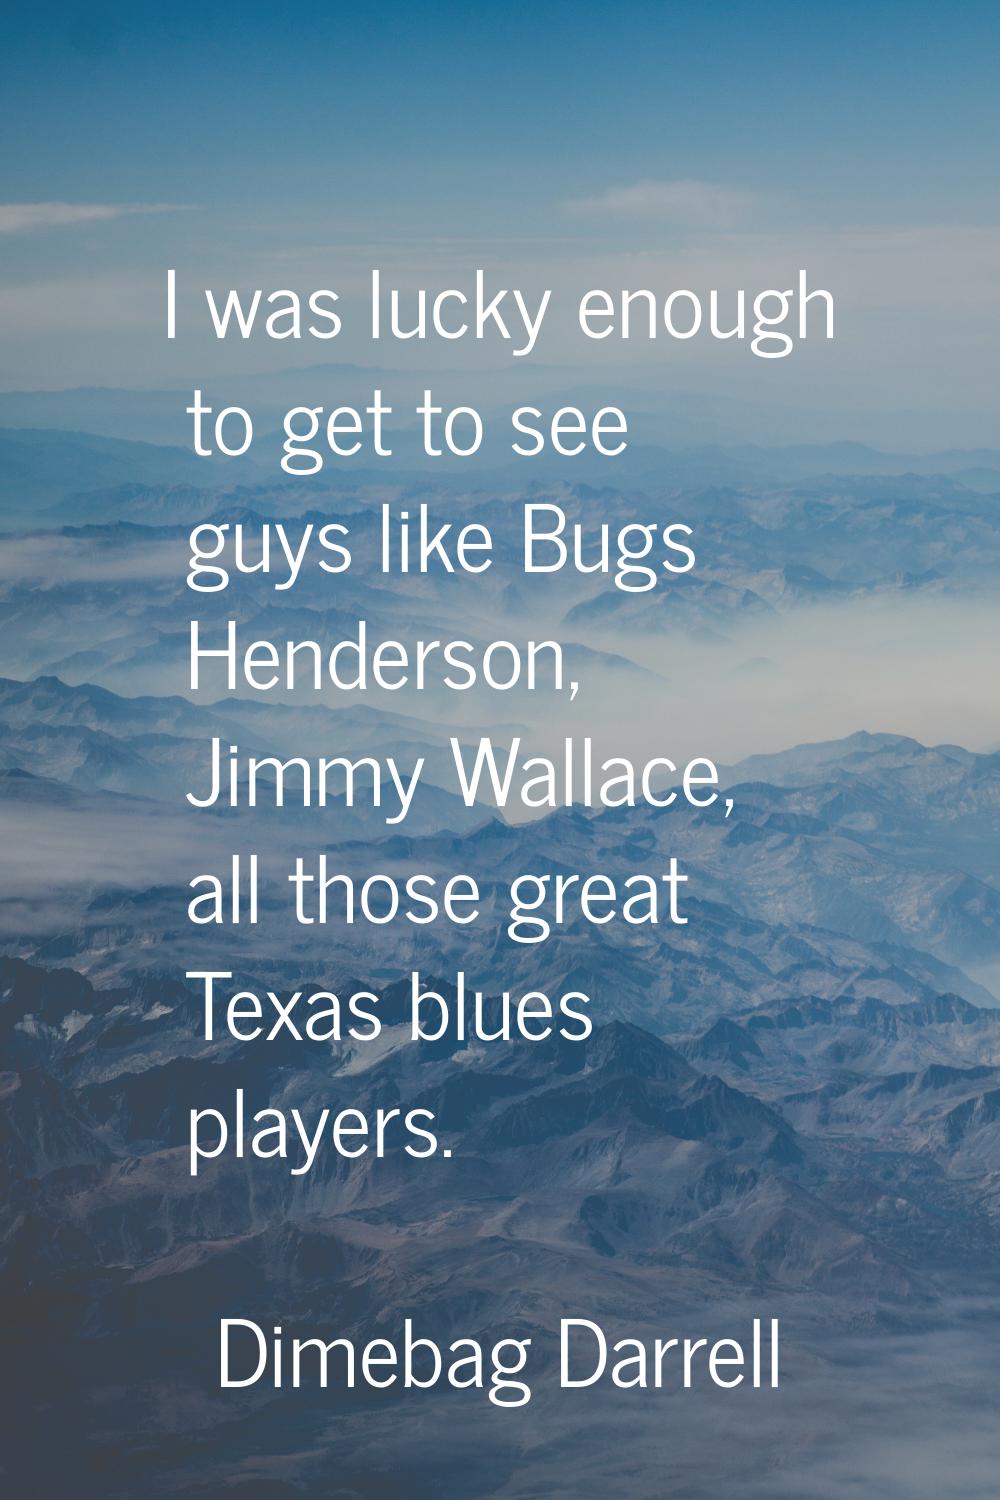 I was lucky enough to get to see guys like Bugs Henderson, Jimmy Wallace, all those great Texas blu